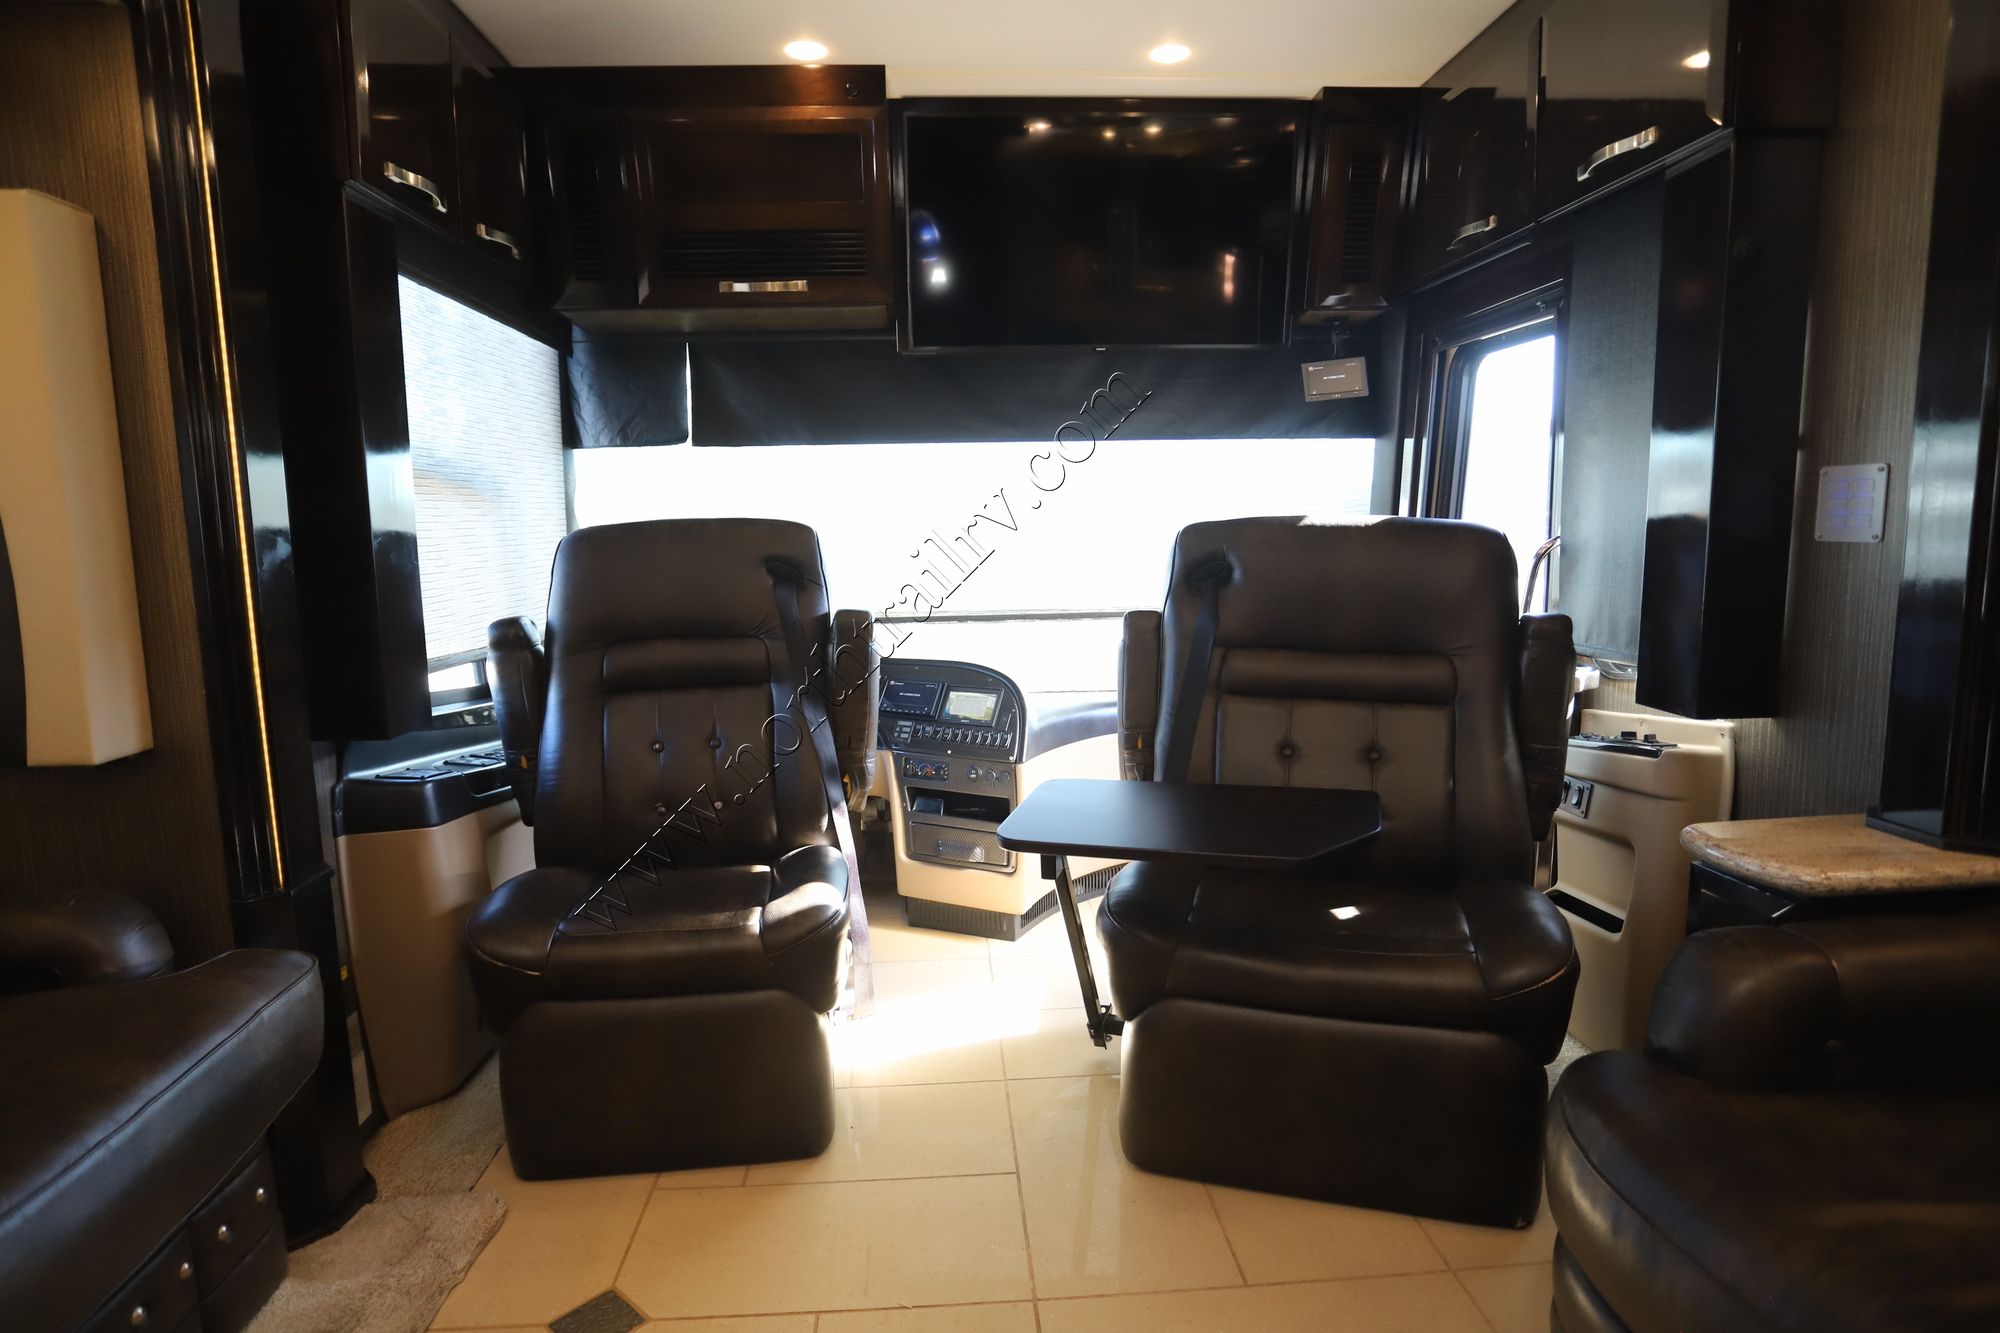 Used 2014 Newmar King Aire 4584 Class A  For Sale